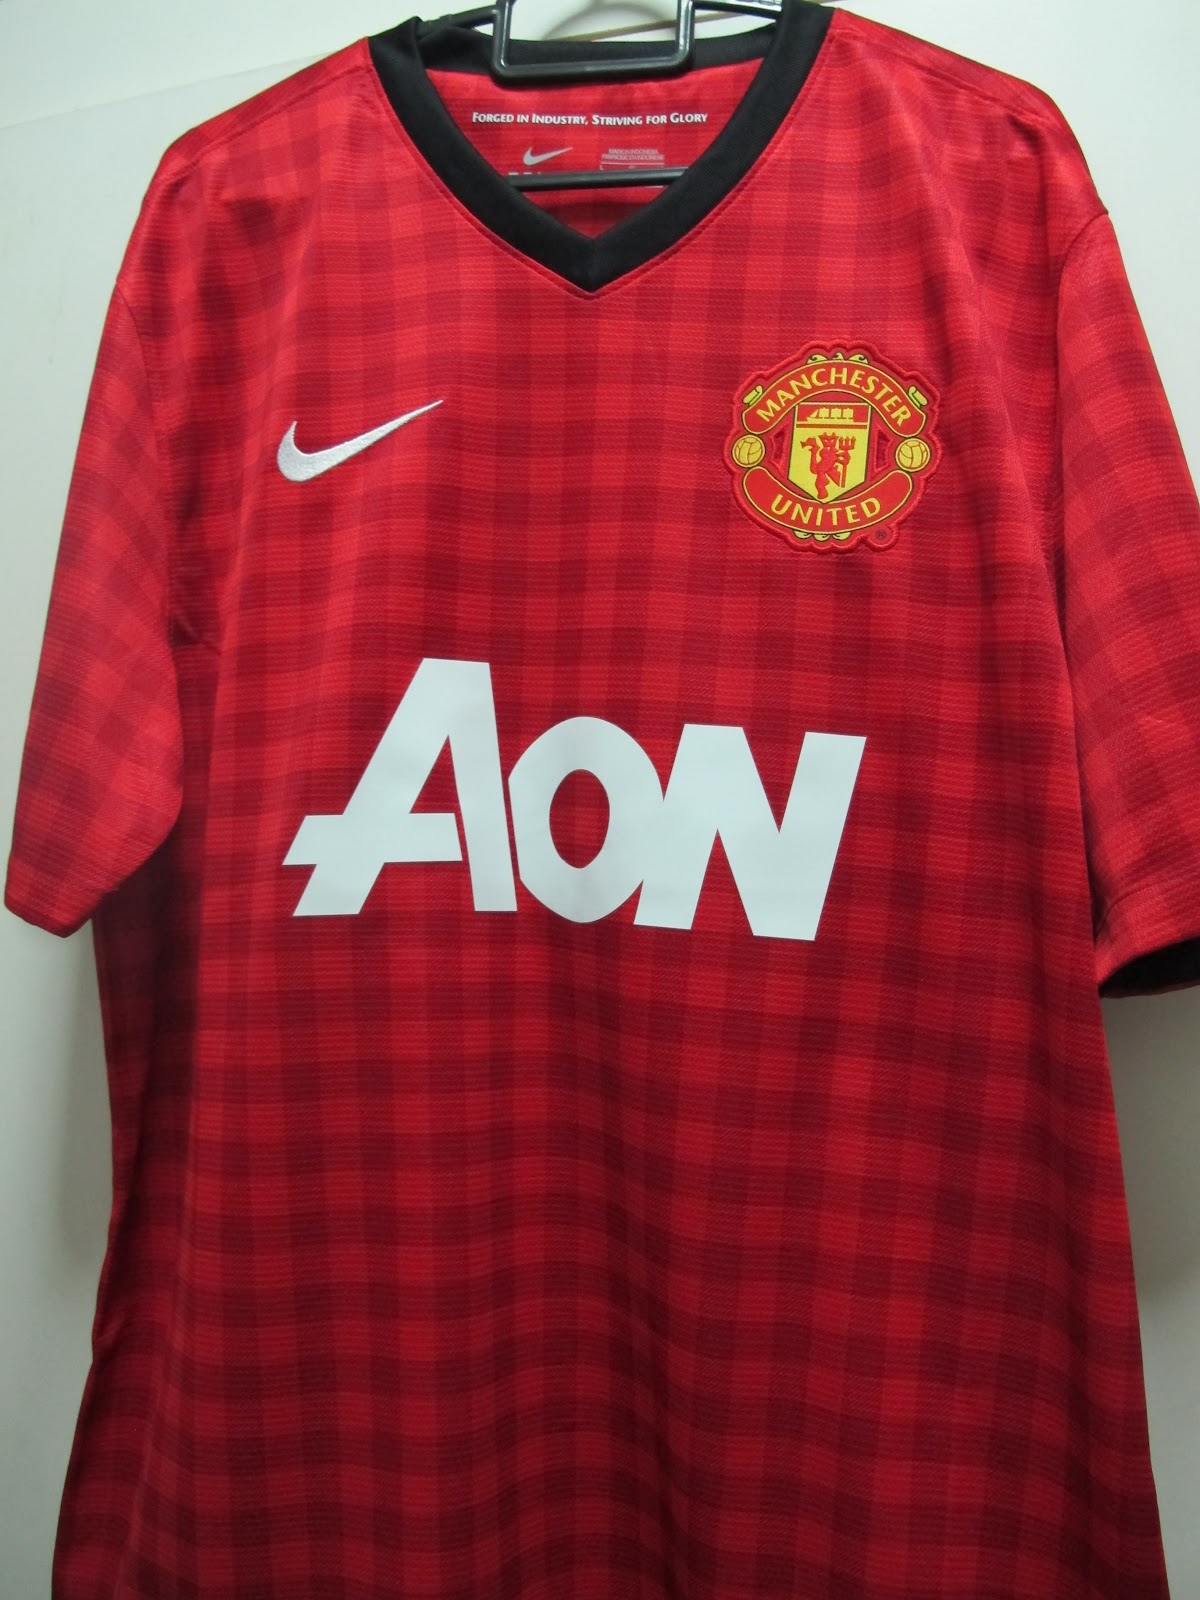 Neon's Football Jerseys: Manchester United Home 2012/2013